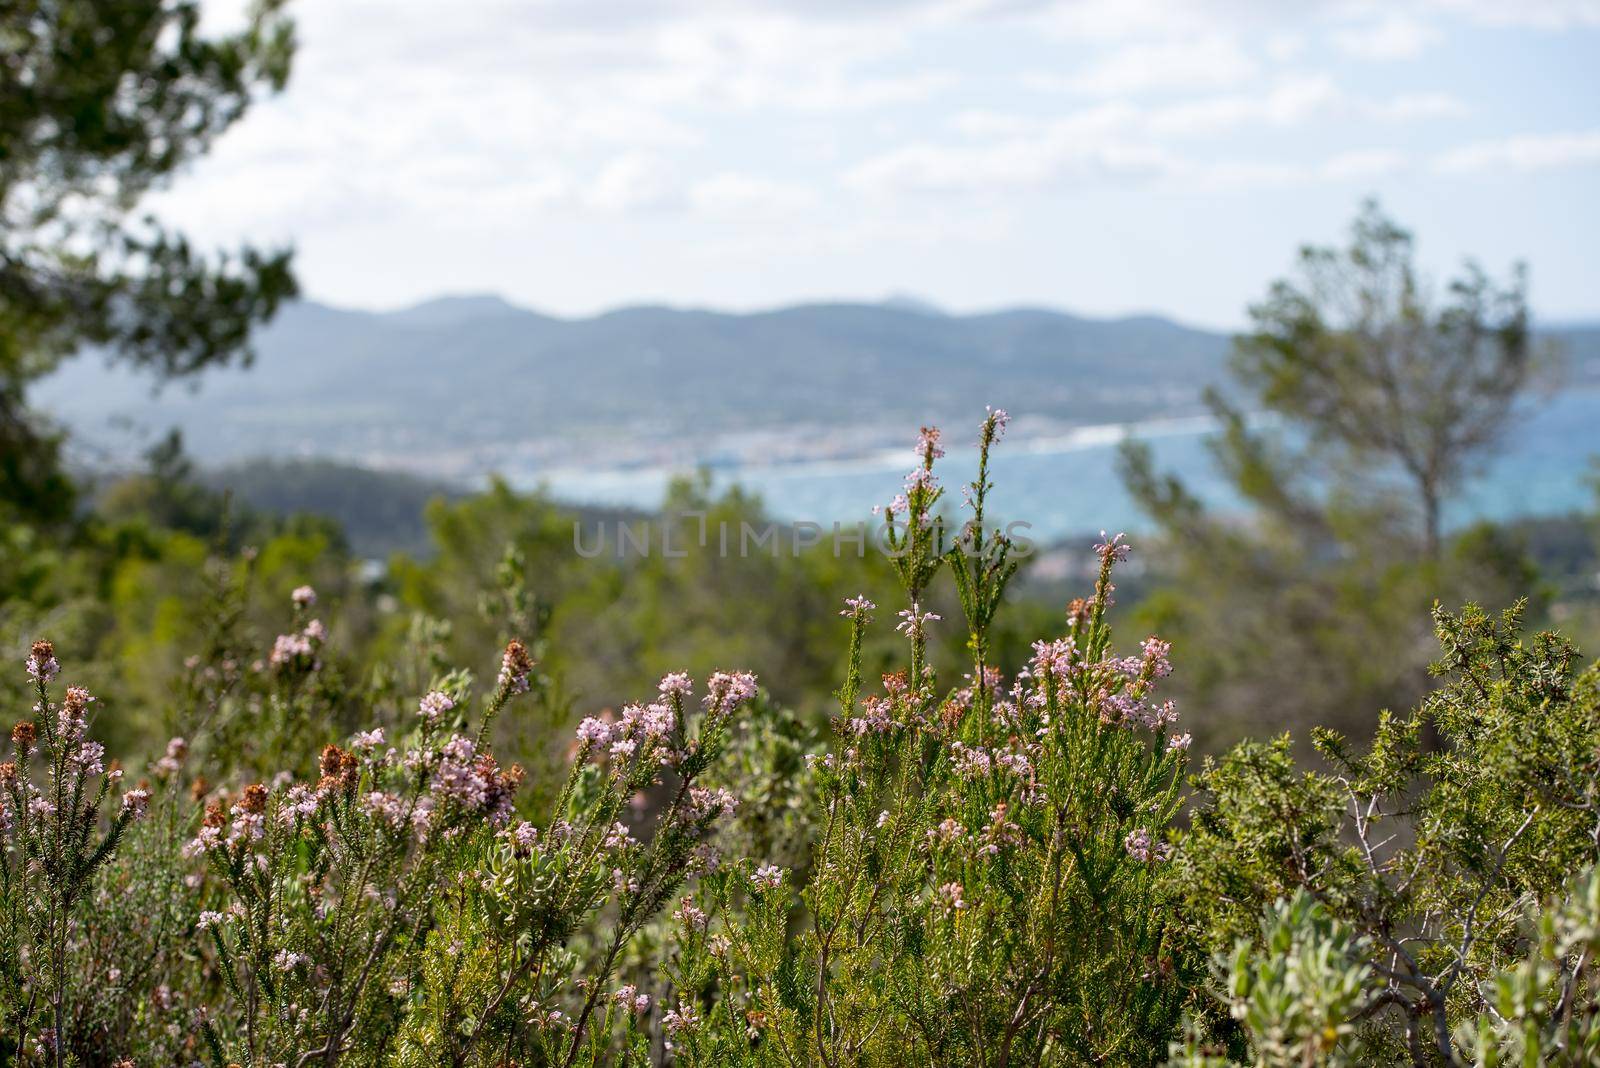 Mediterranean flora with the Panoramic View of the city of Sant Antoni de Portmany in Ibiza, Spain